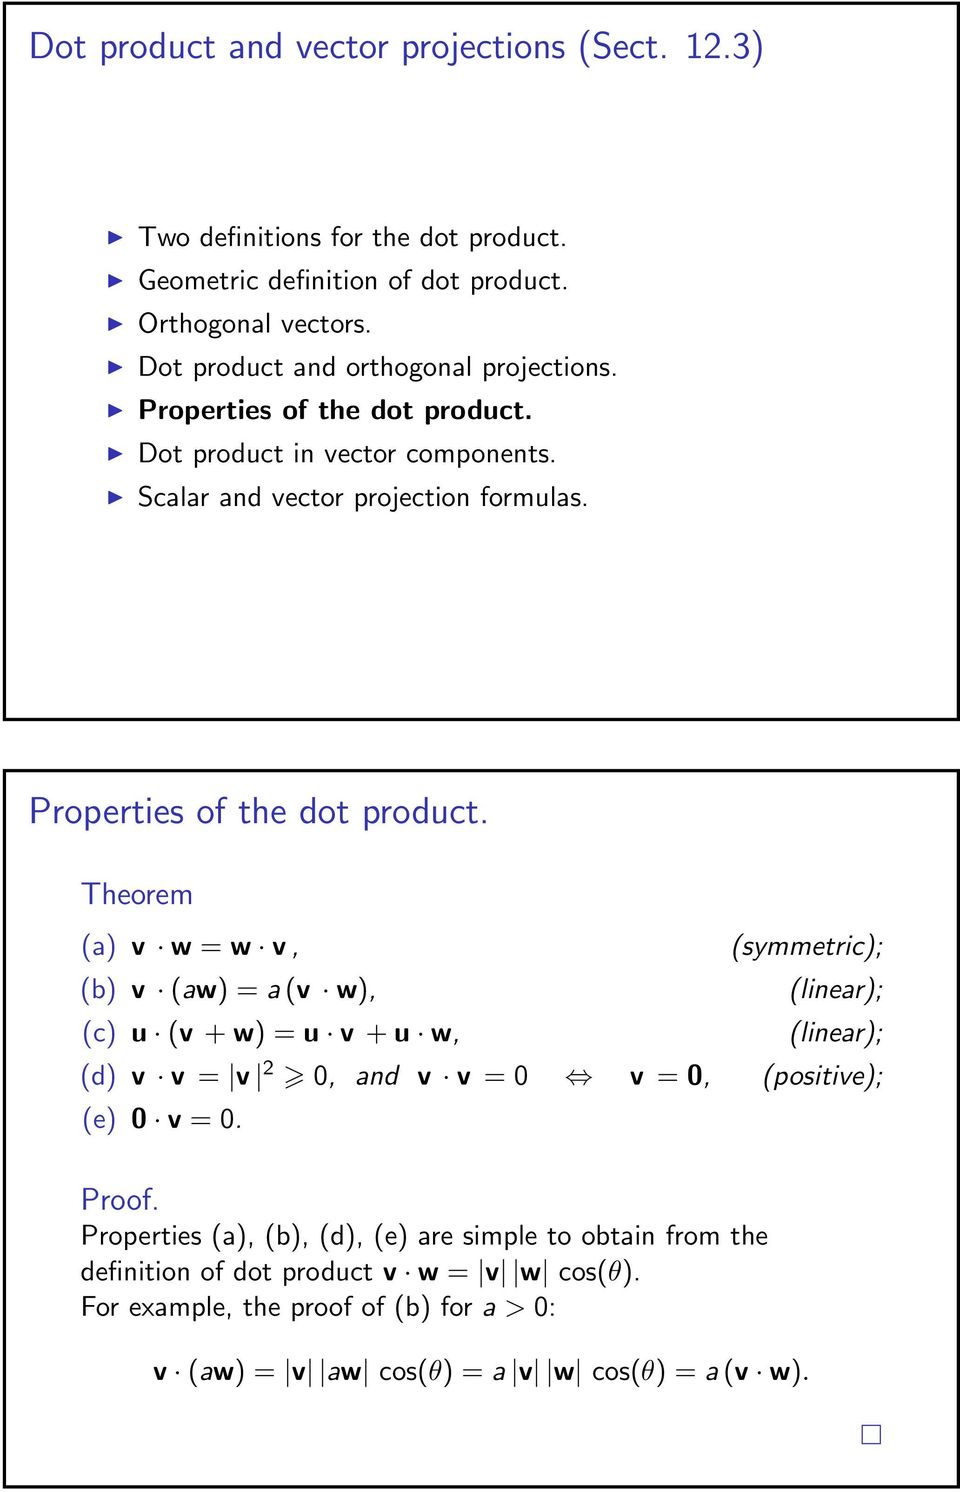 Properties of the dot product.